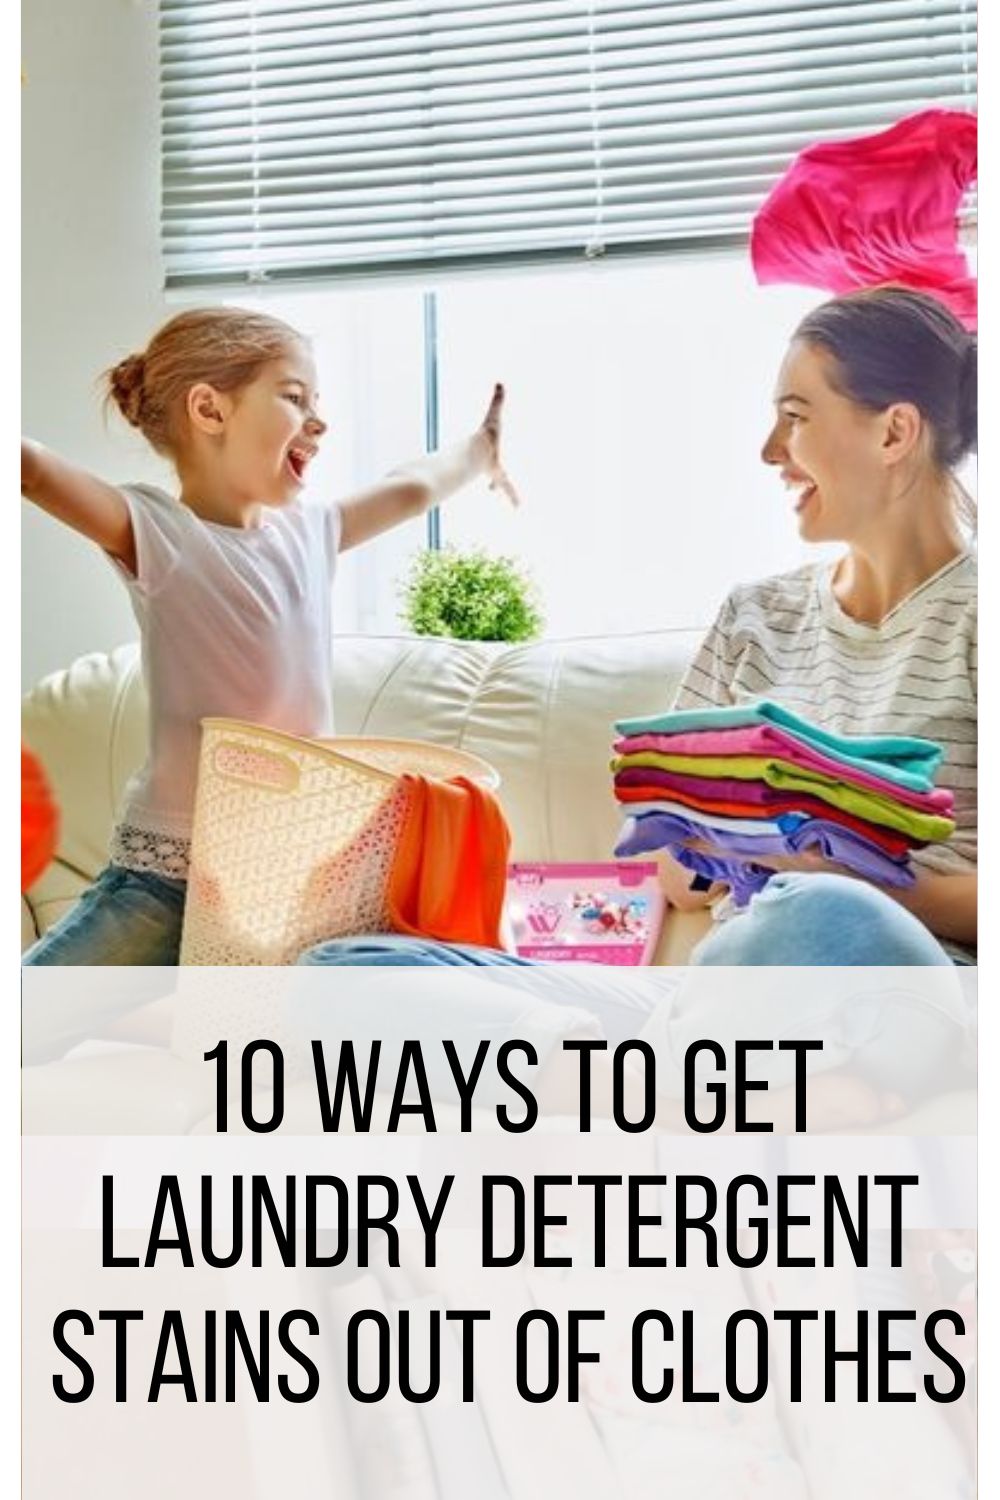 10 Ways to Get Laundry Detergent Stains Out of Clothes